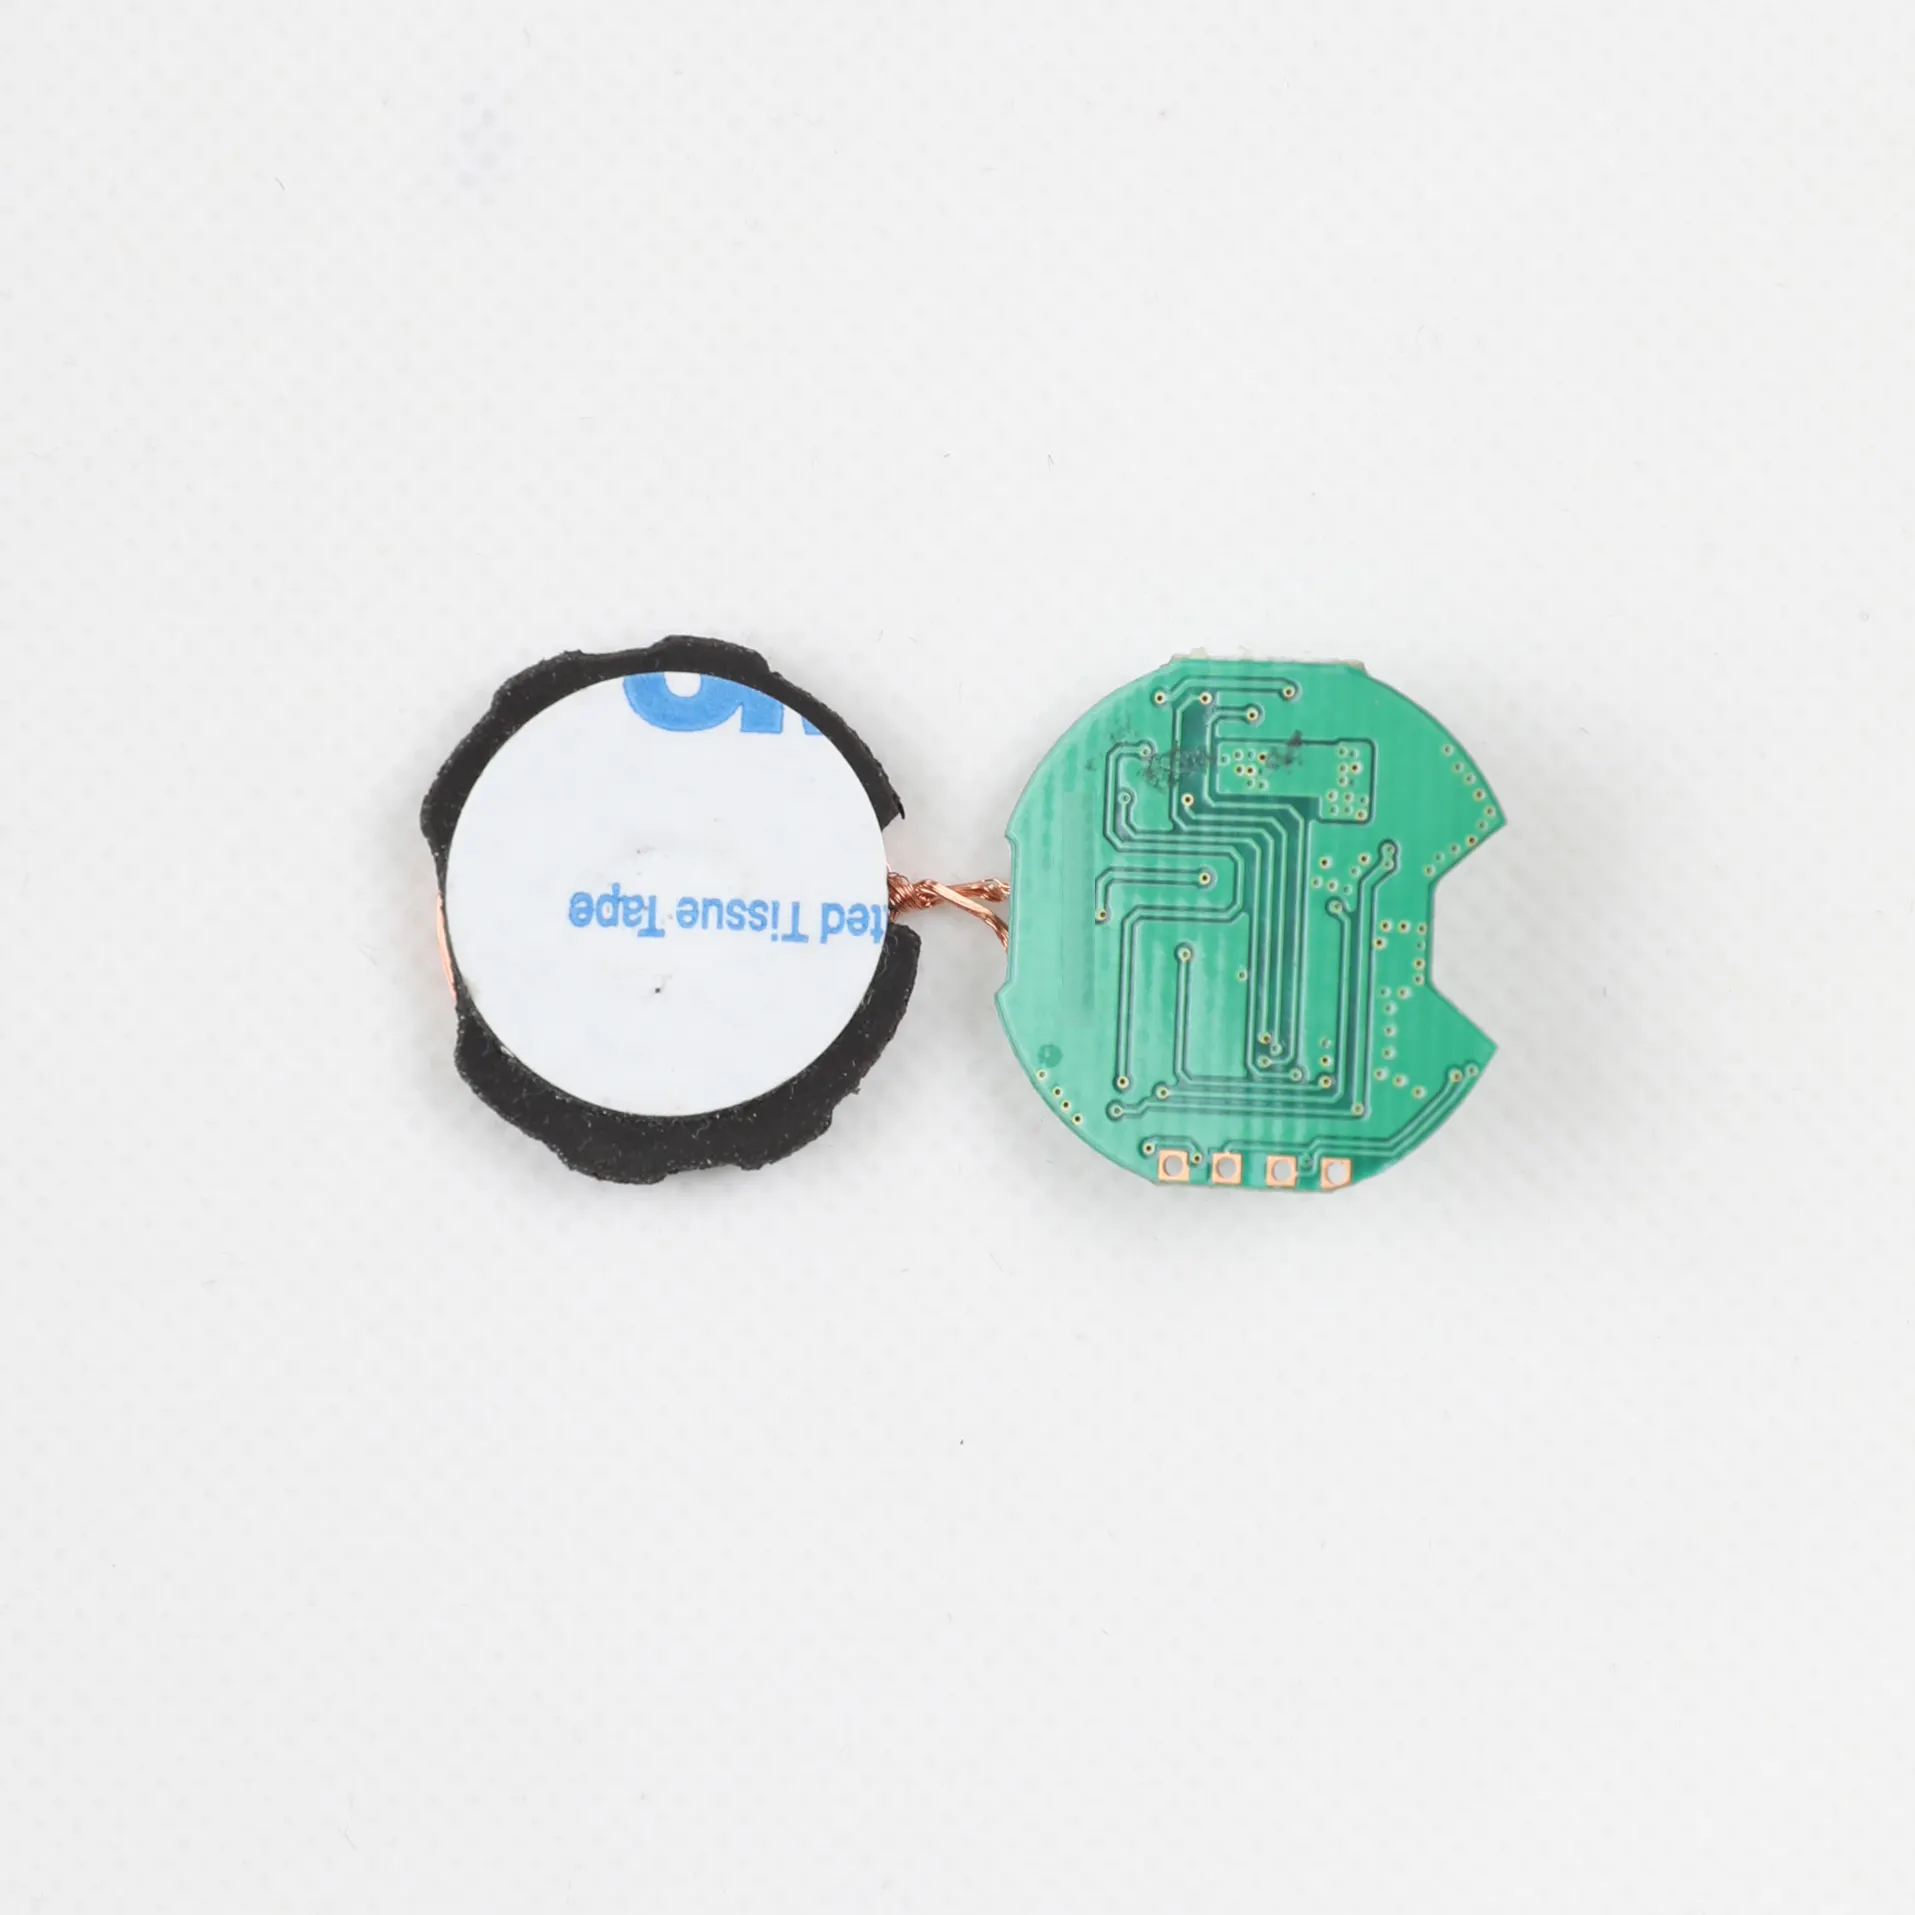 Shenzhen Manufacture OEM ODM PCBA PCB Maker Wireless Charger Watch Fast Charging PCBA PCB Assembly